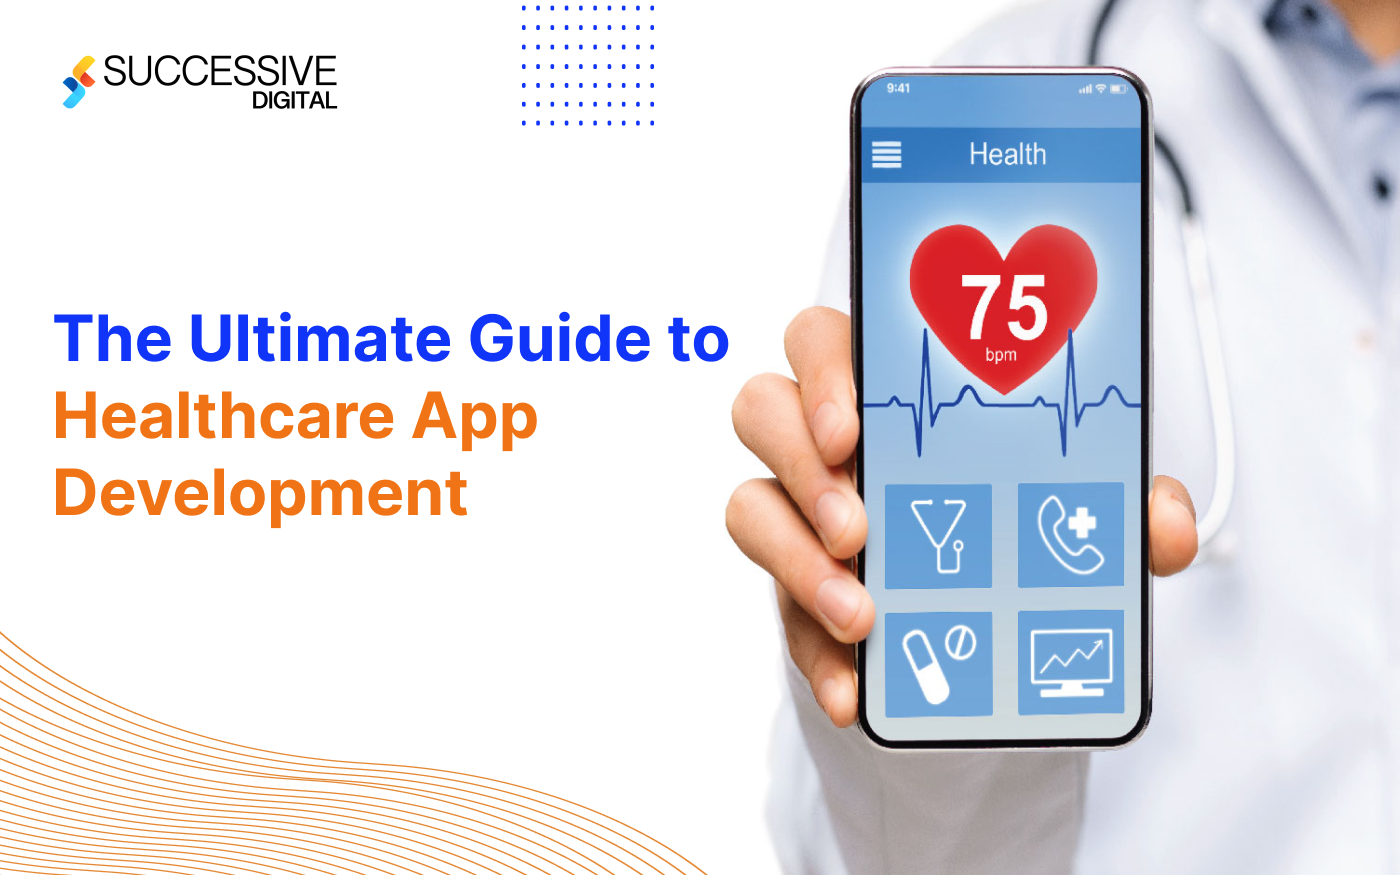 The Ultimate Guide to Healthcare App Development